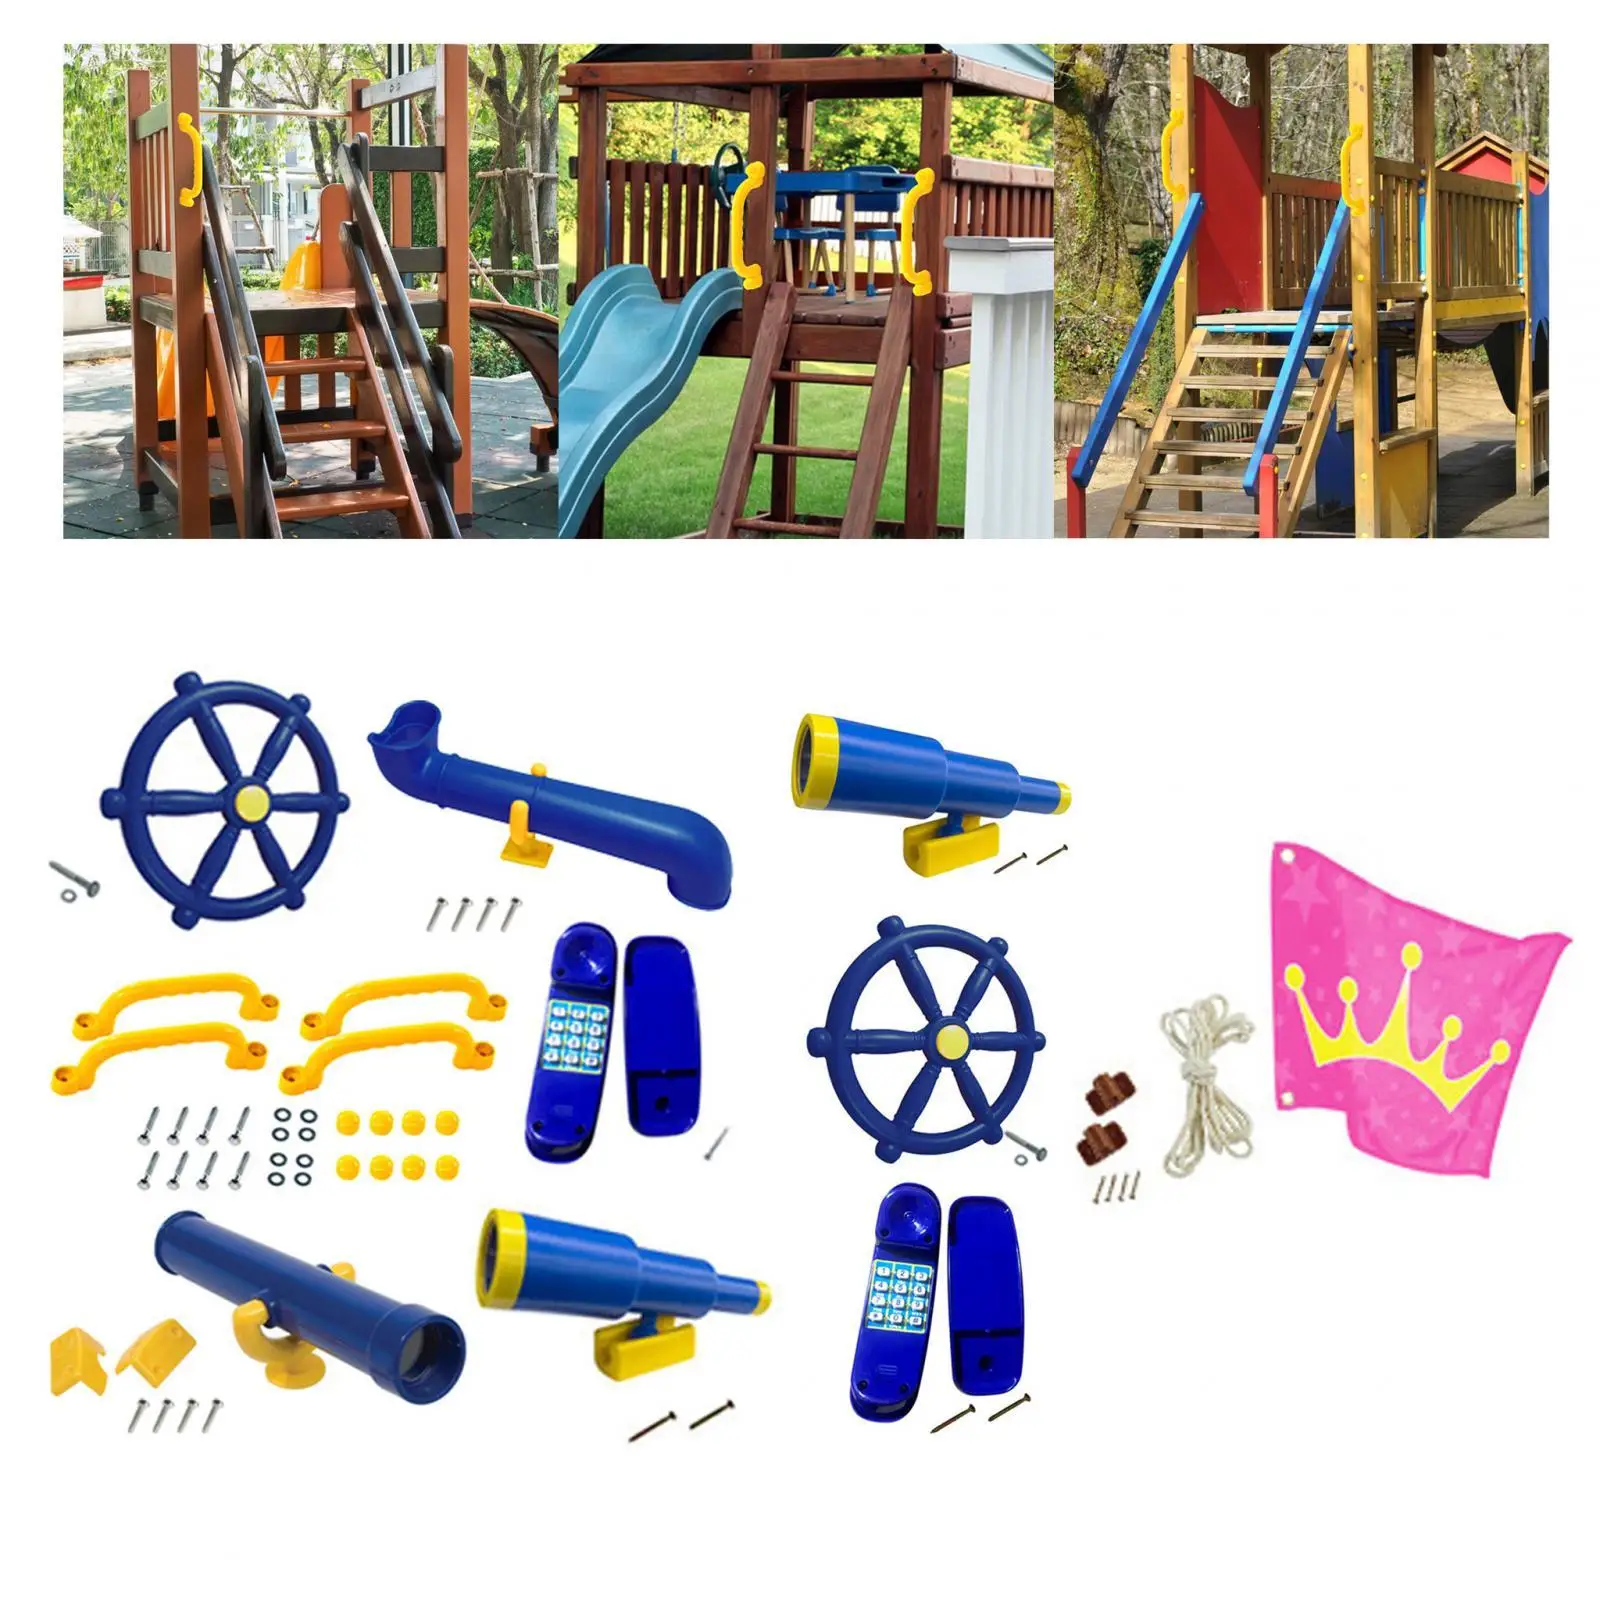 Playground Equipment Easy to Install Heavy Duty Swing Playground Accessories for Backyard Playhouse Swingset Tree House Gifts